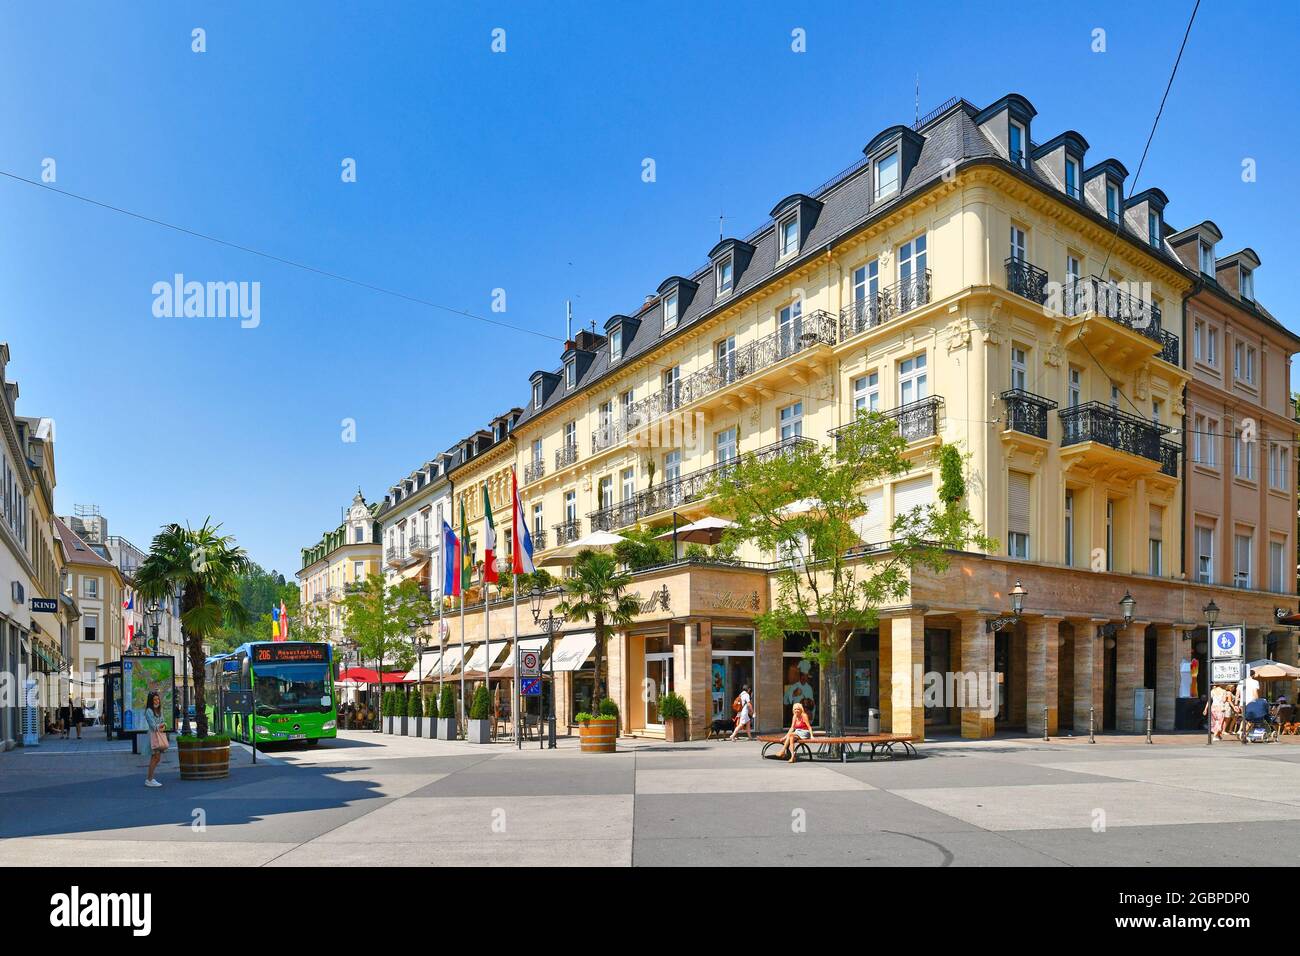 Baden-Baden, Germany - July 2021: Town square called 'Leopoldsplatz' in historic city center of spa town Baden-Baden on a sunny summer day Stock Photo